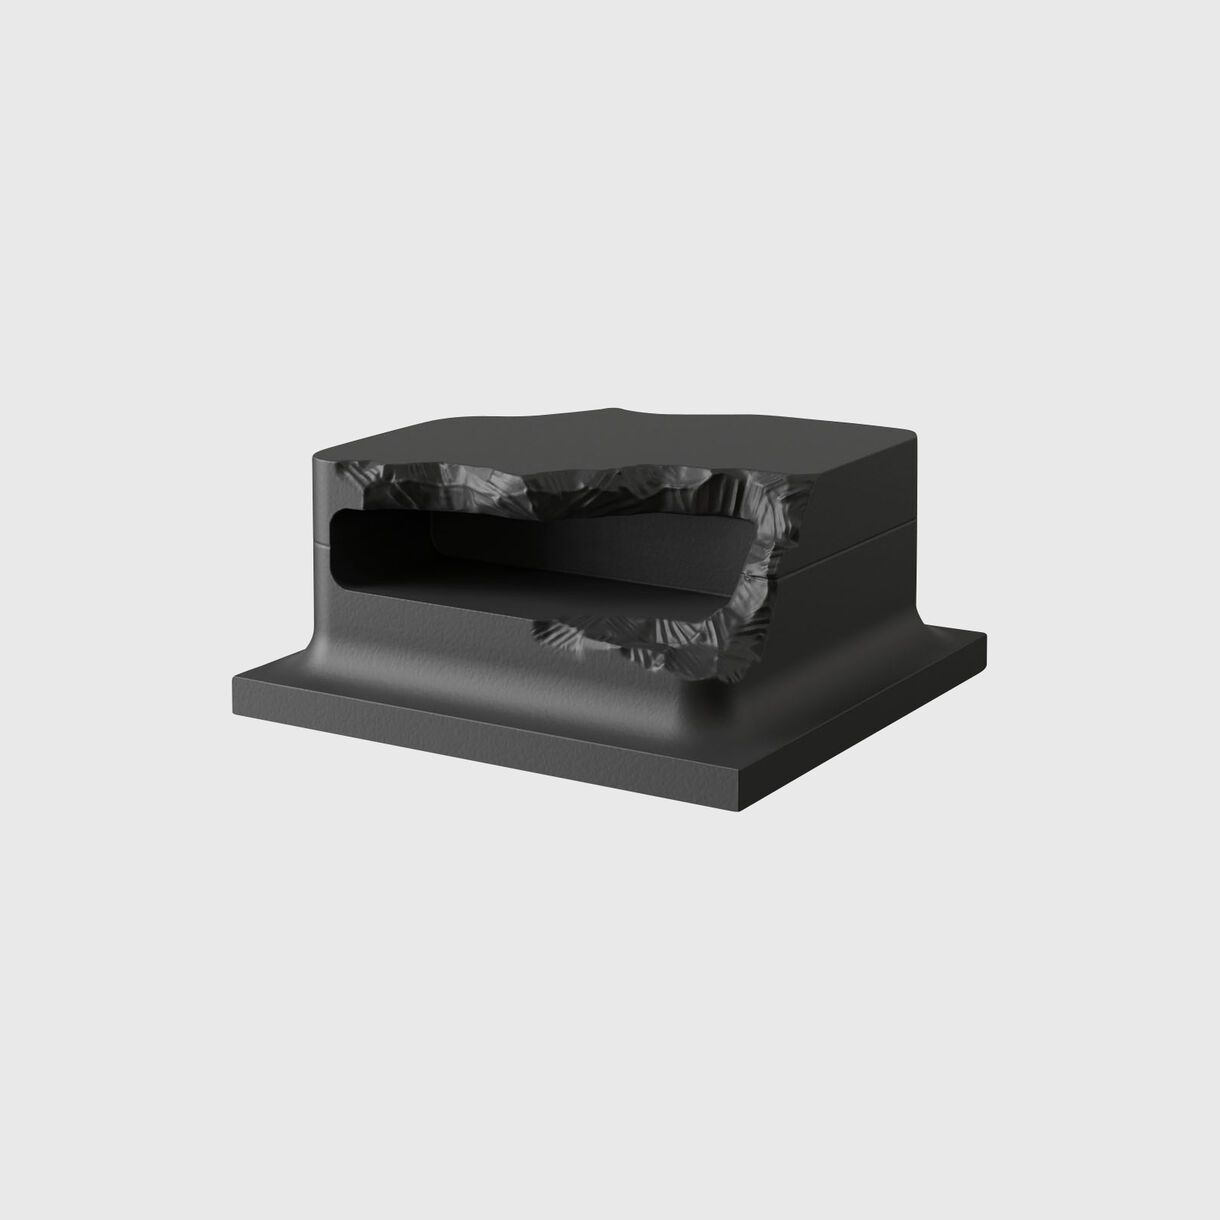 The Sculpted Series Coffee Table, Limited Edition, Black